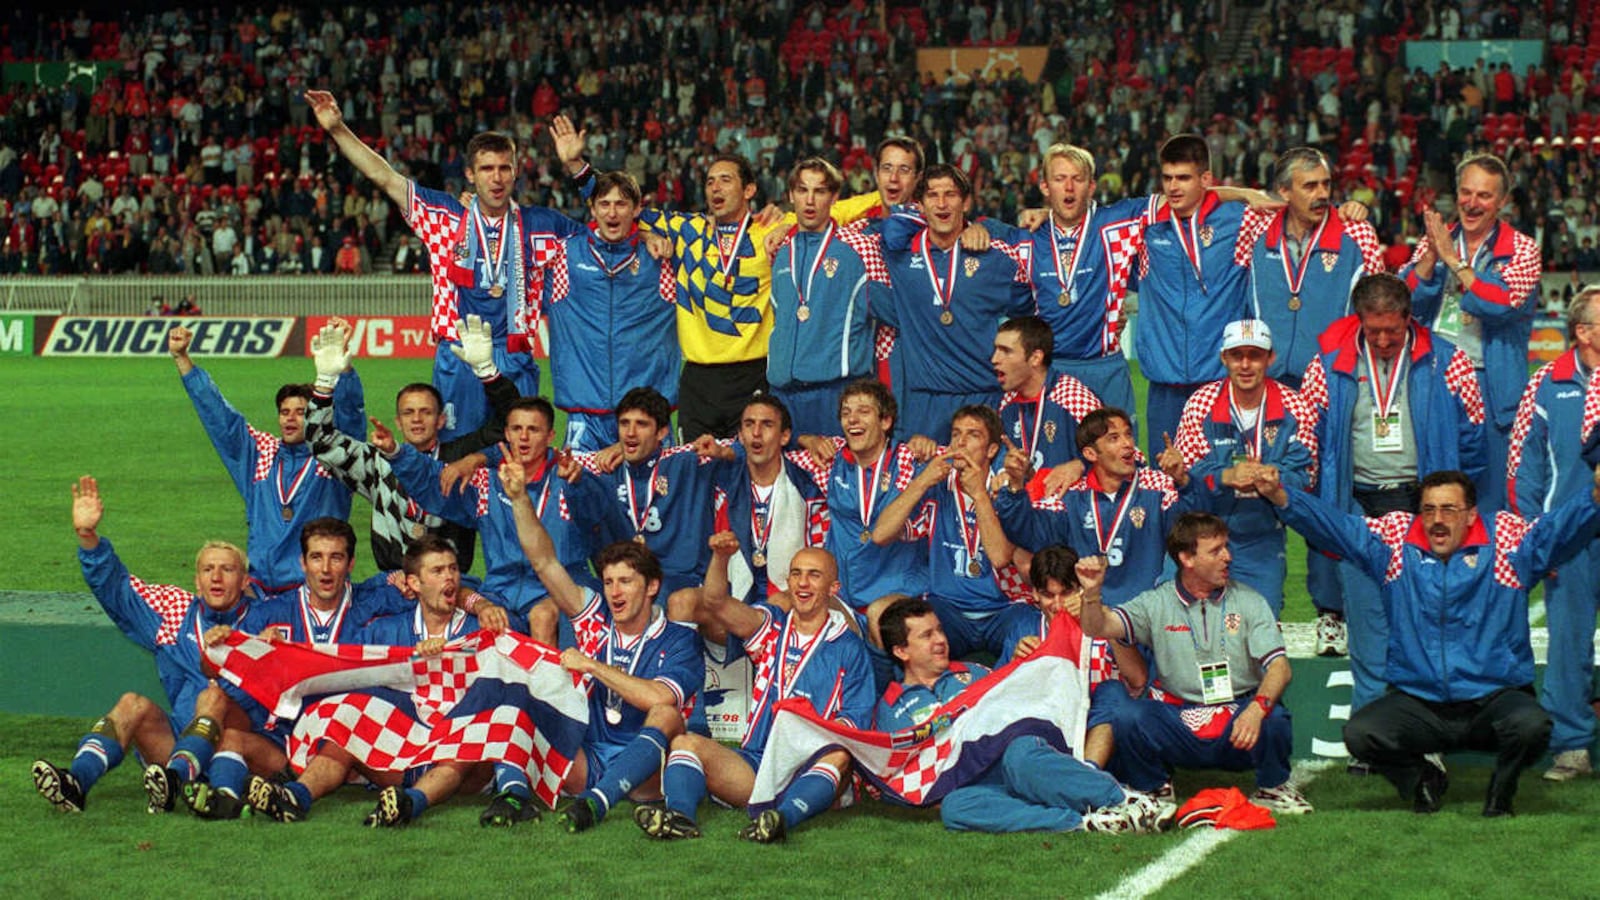 FIFA World Cup 2018: France '98 - when Croatia crashed the World Cup party